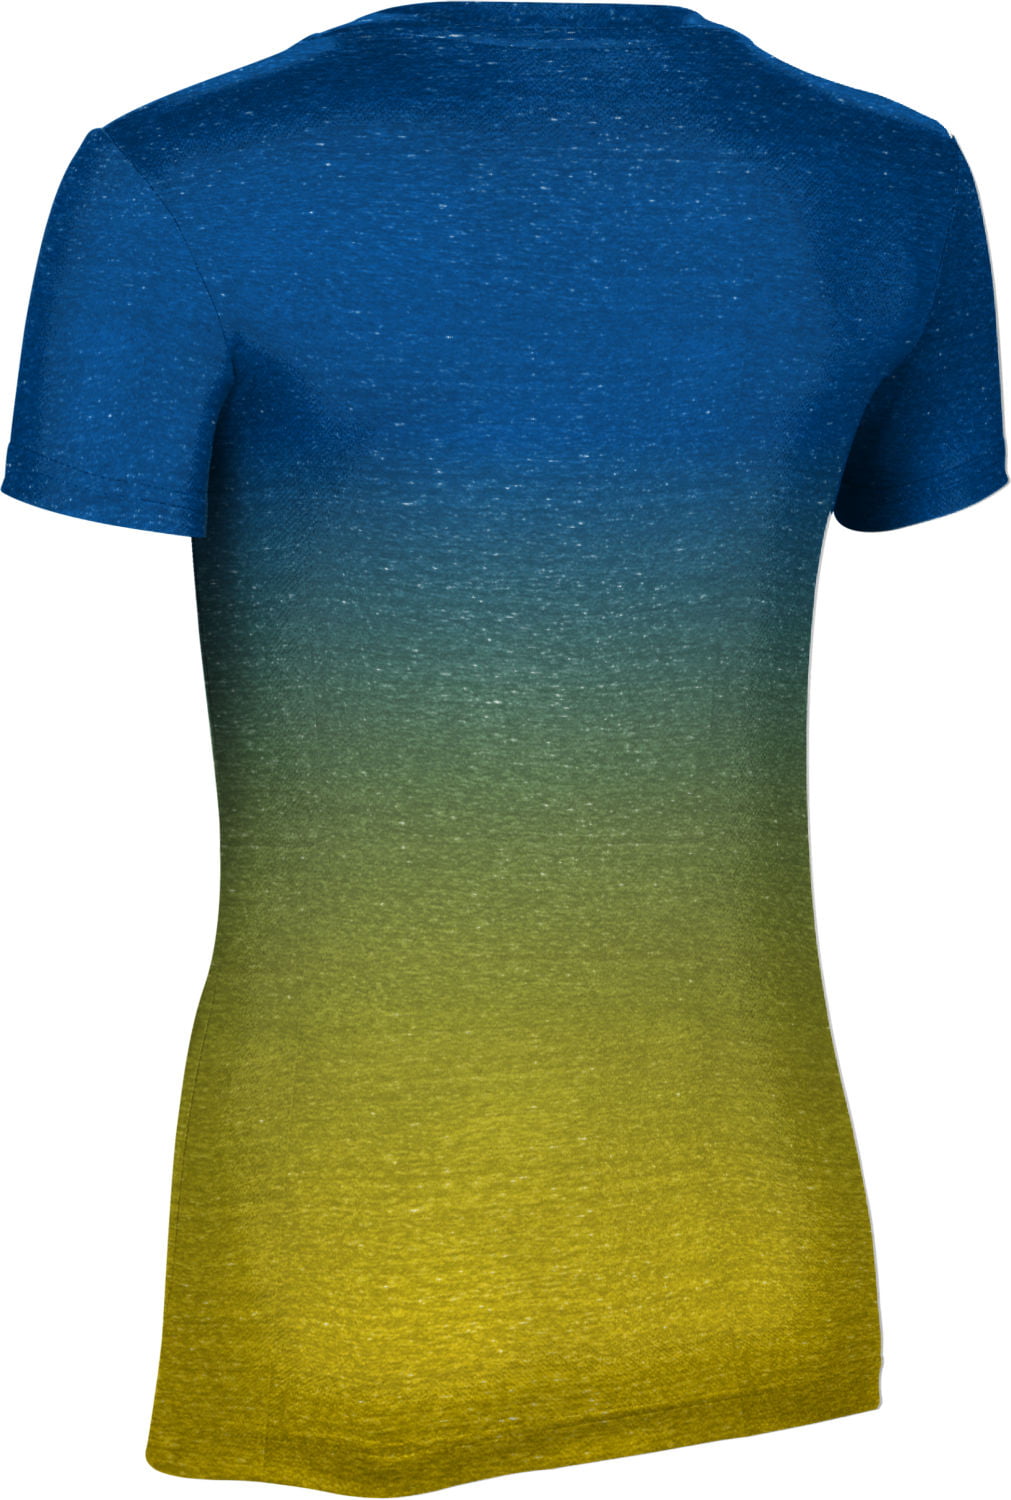 Ombre Bakersfield Mens Performance T-Shirt ProSphere California State University